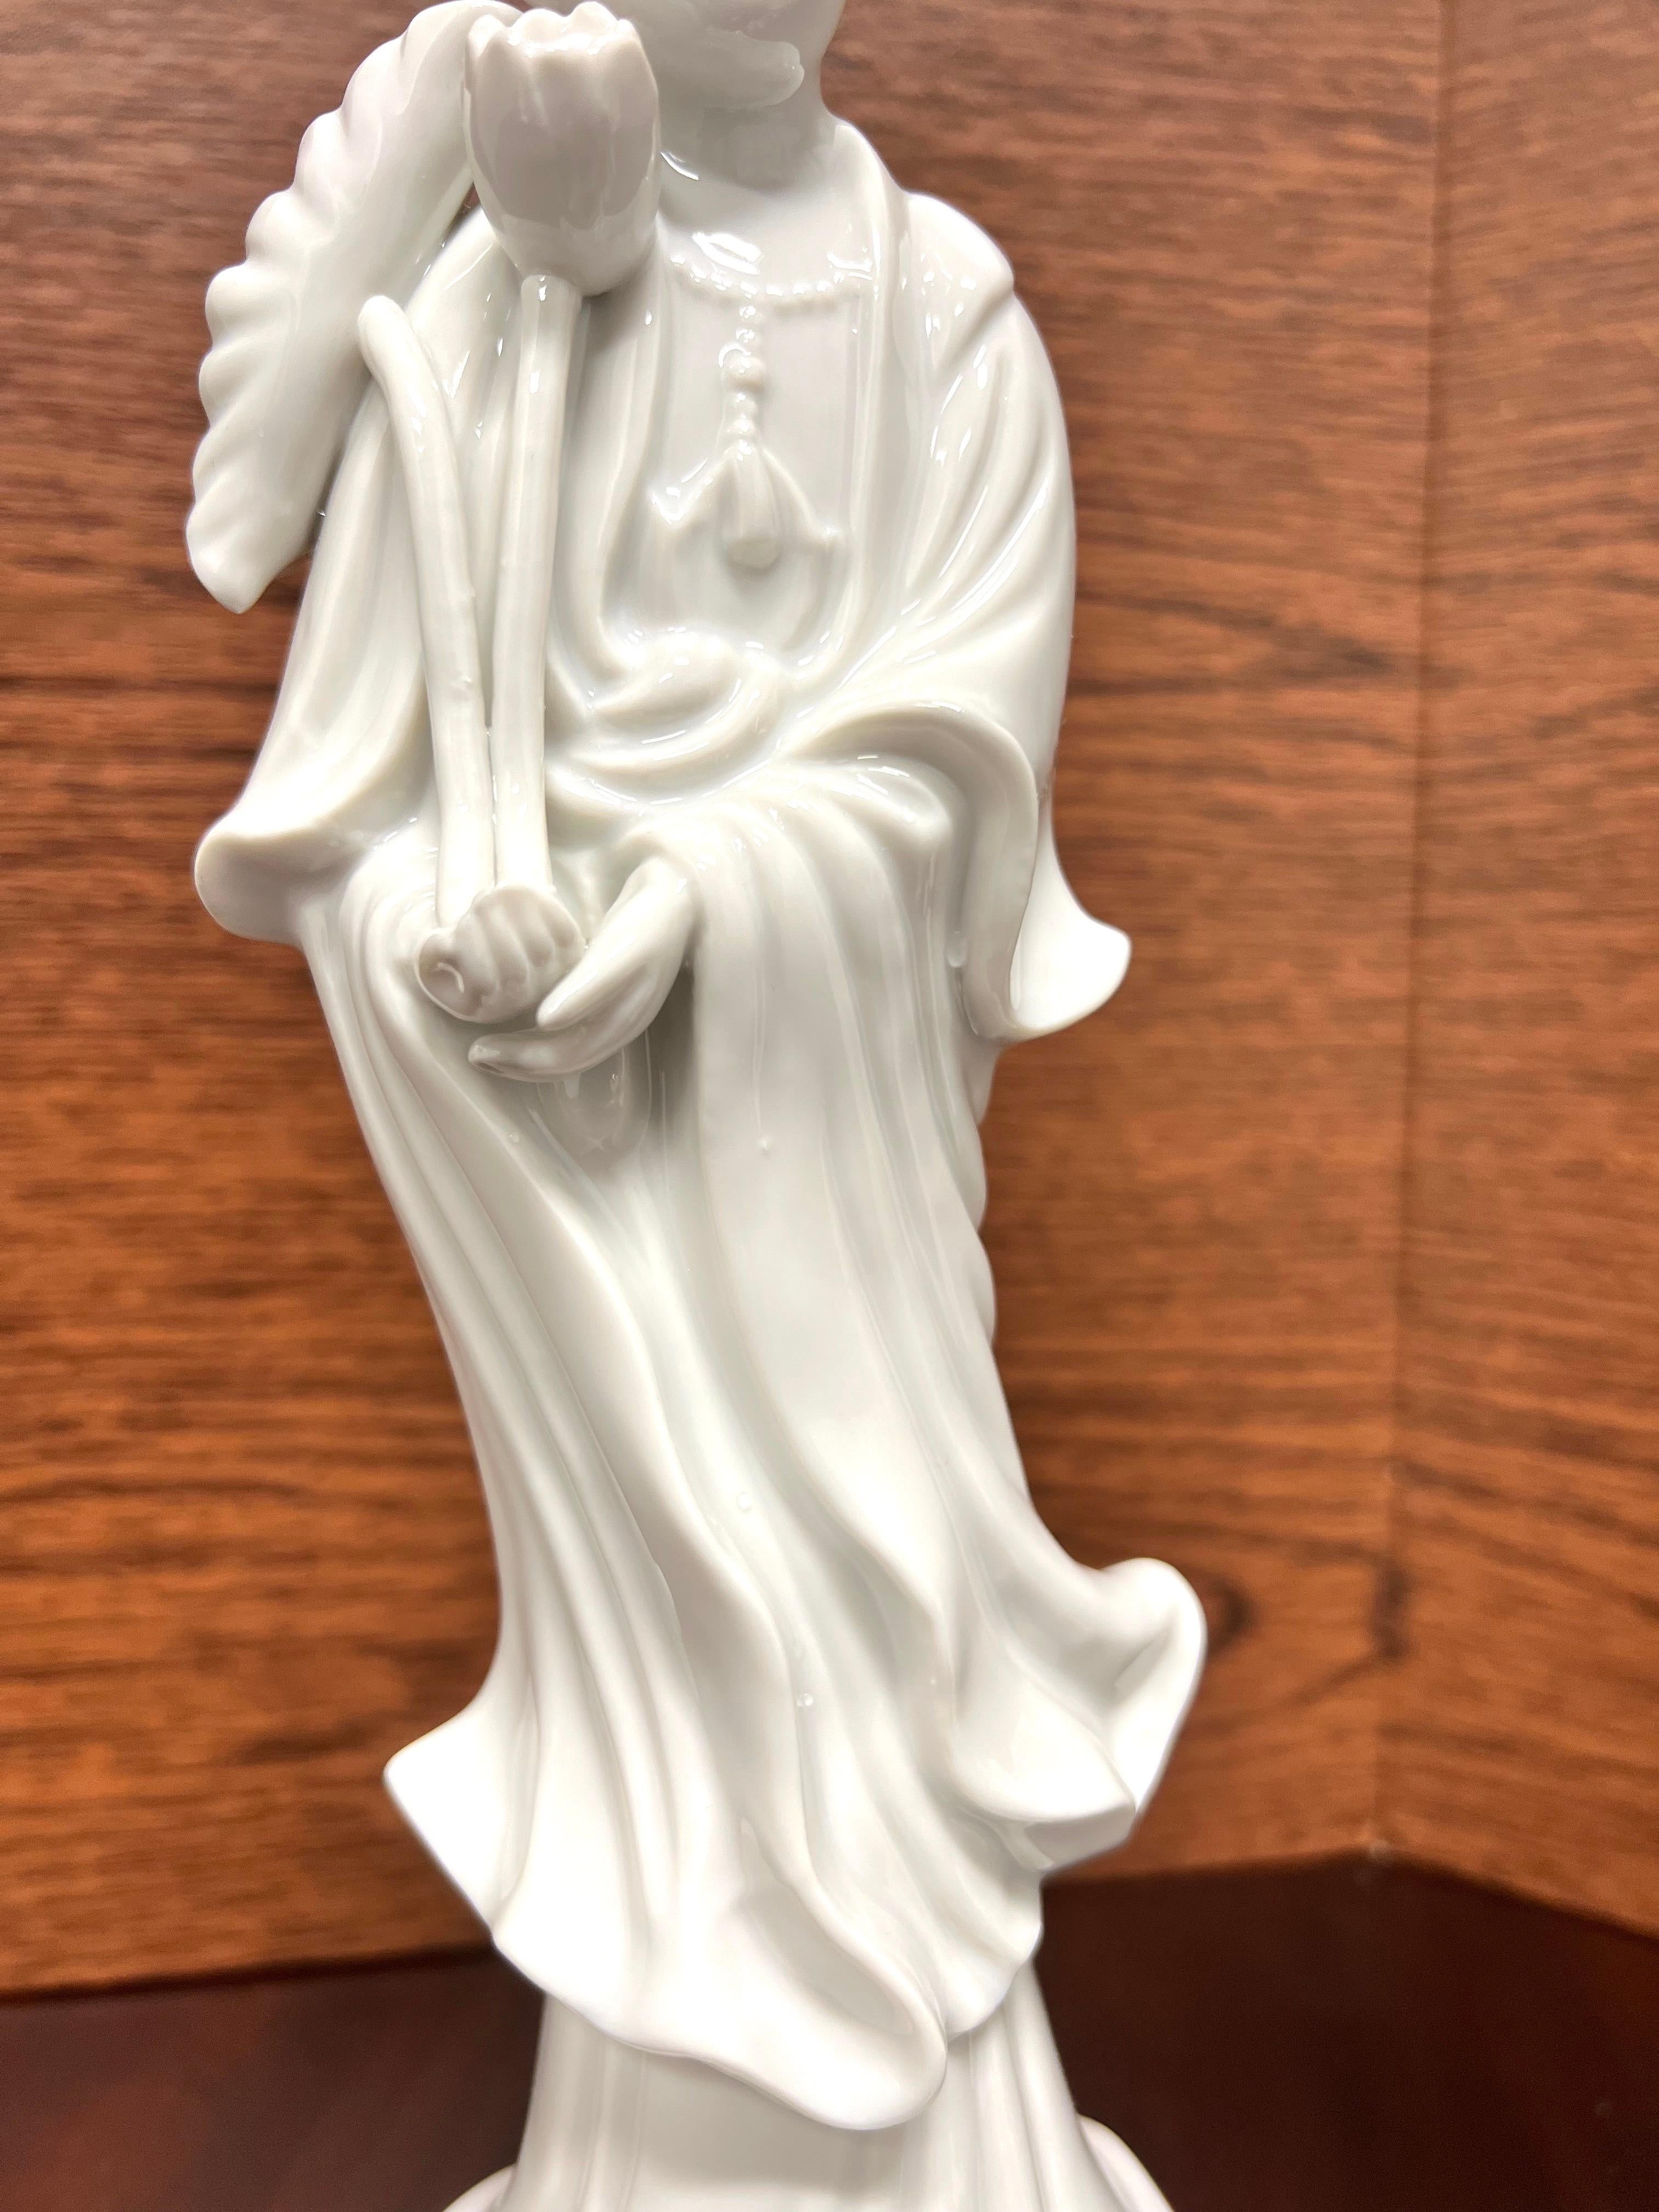 ANDREA BY SADEK White Porcelain Quan Yin Goddess of Mercy Figurines - Pair In Good Condition For Sale In Charlotte, NC